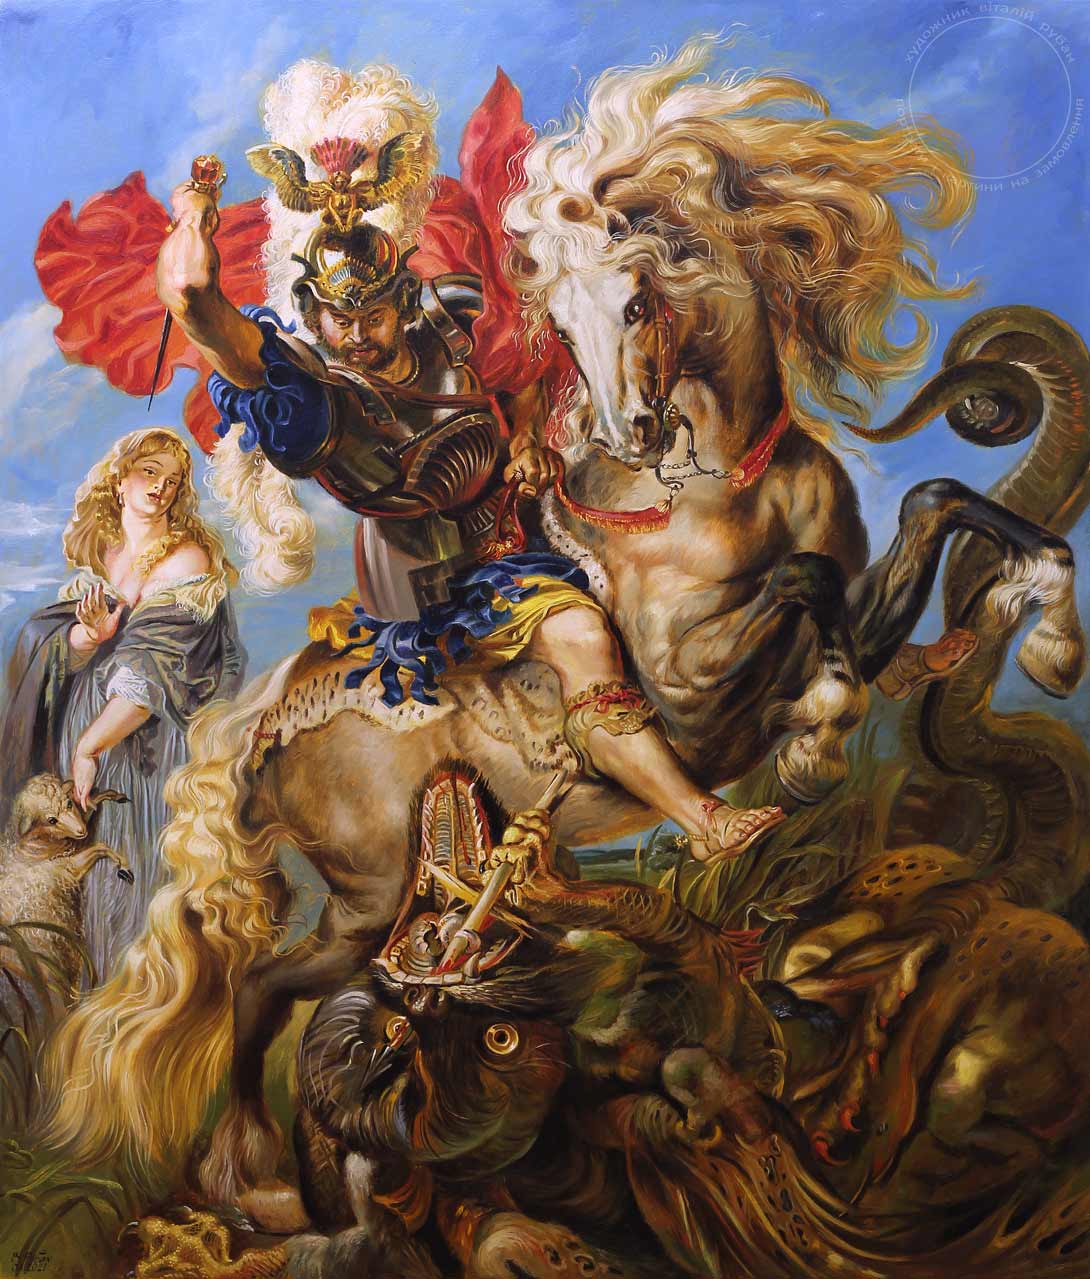 Copy of the painting Saint George and the dragon - artist Vitalii Ruban.